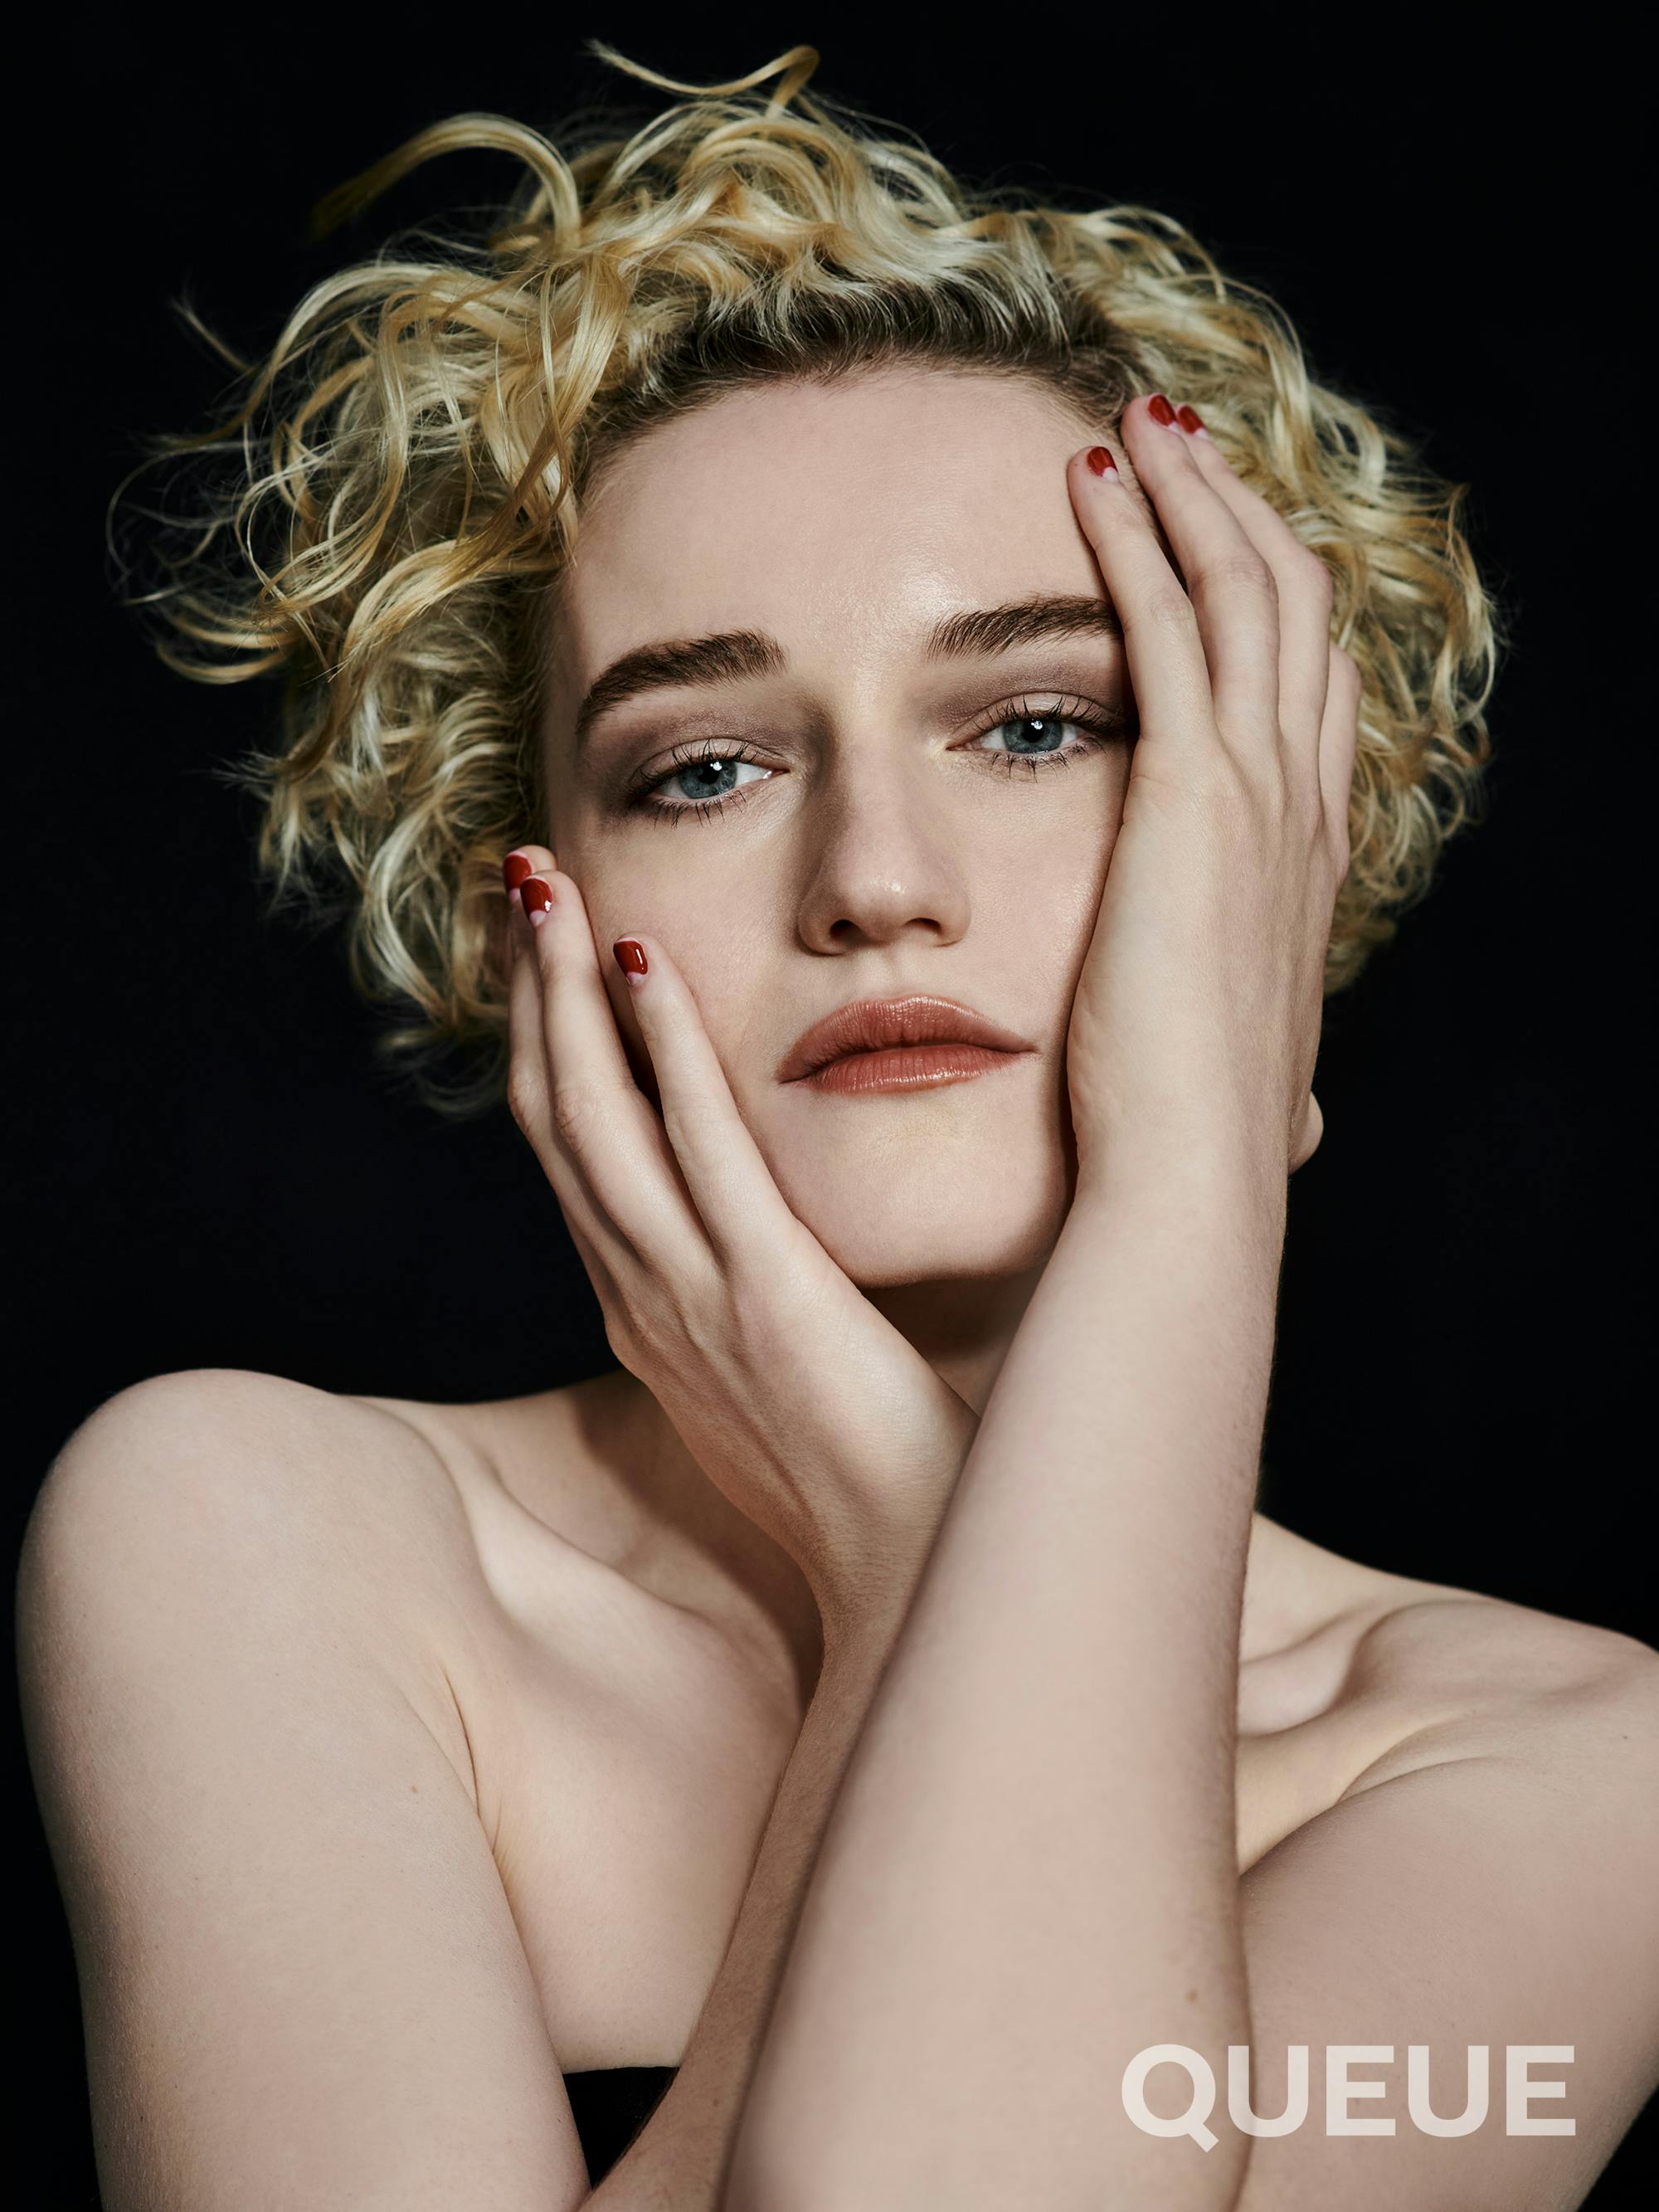 Julia Garner strikes an interesting pose with her arms wrapped around her face.